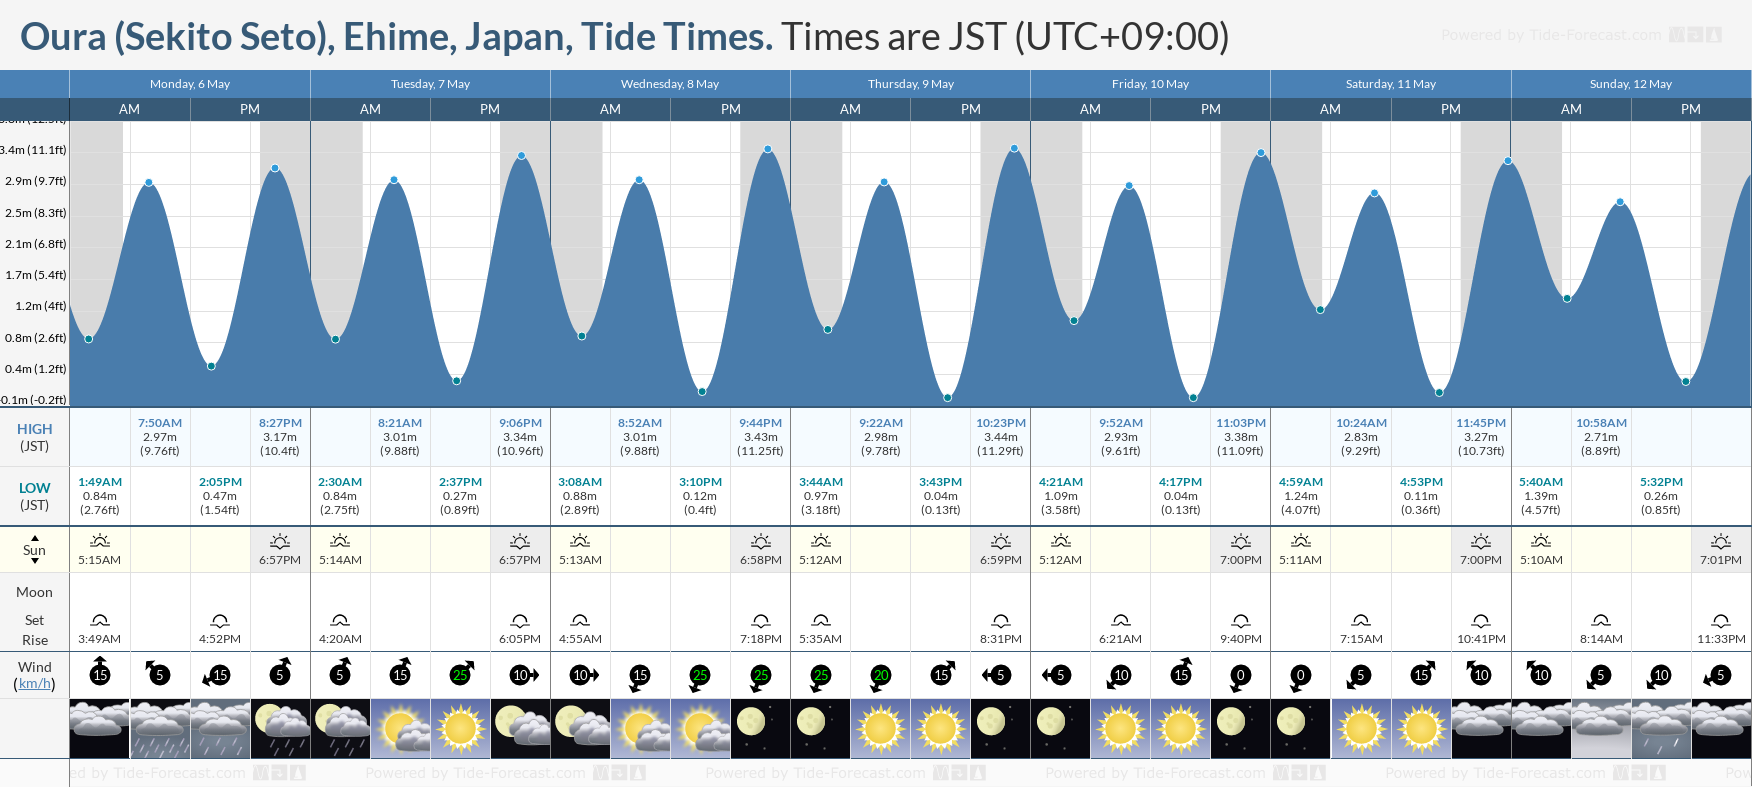 Oura (Sekito Seto), Ehime, Japan Tide Chart including high and low tide tide times for the next 7 days